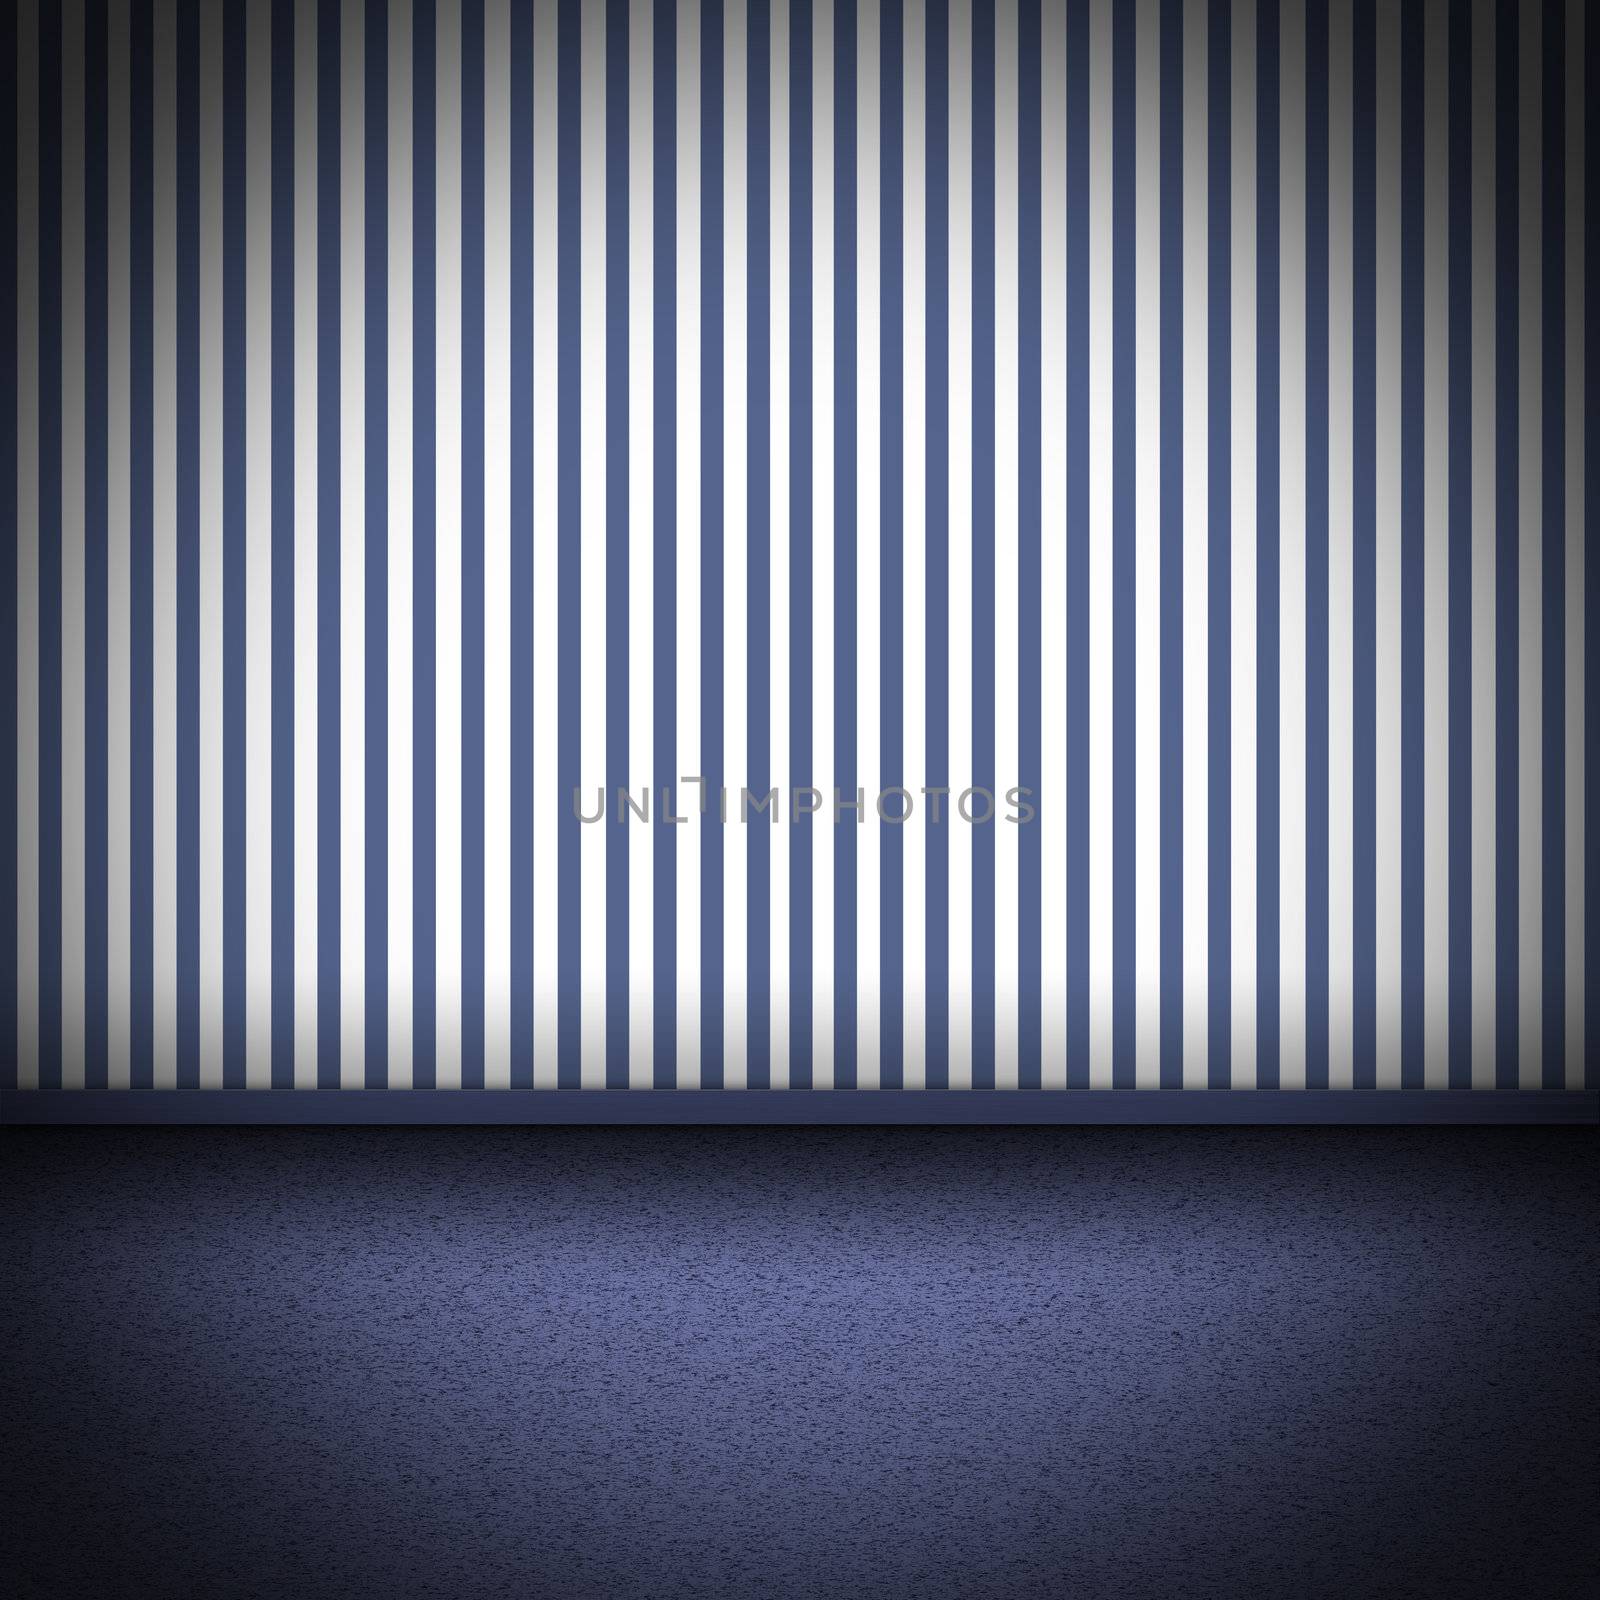 Illustration of a room with blue carpet floor and blue striped wellpaper